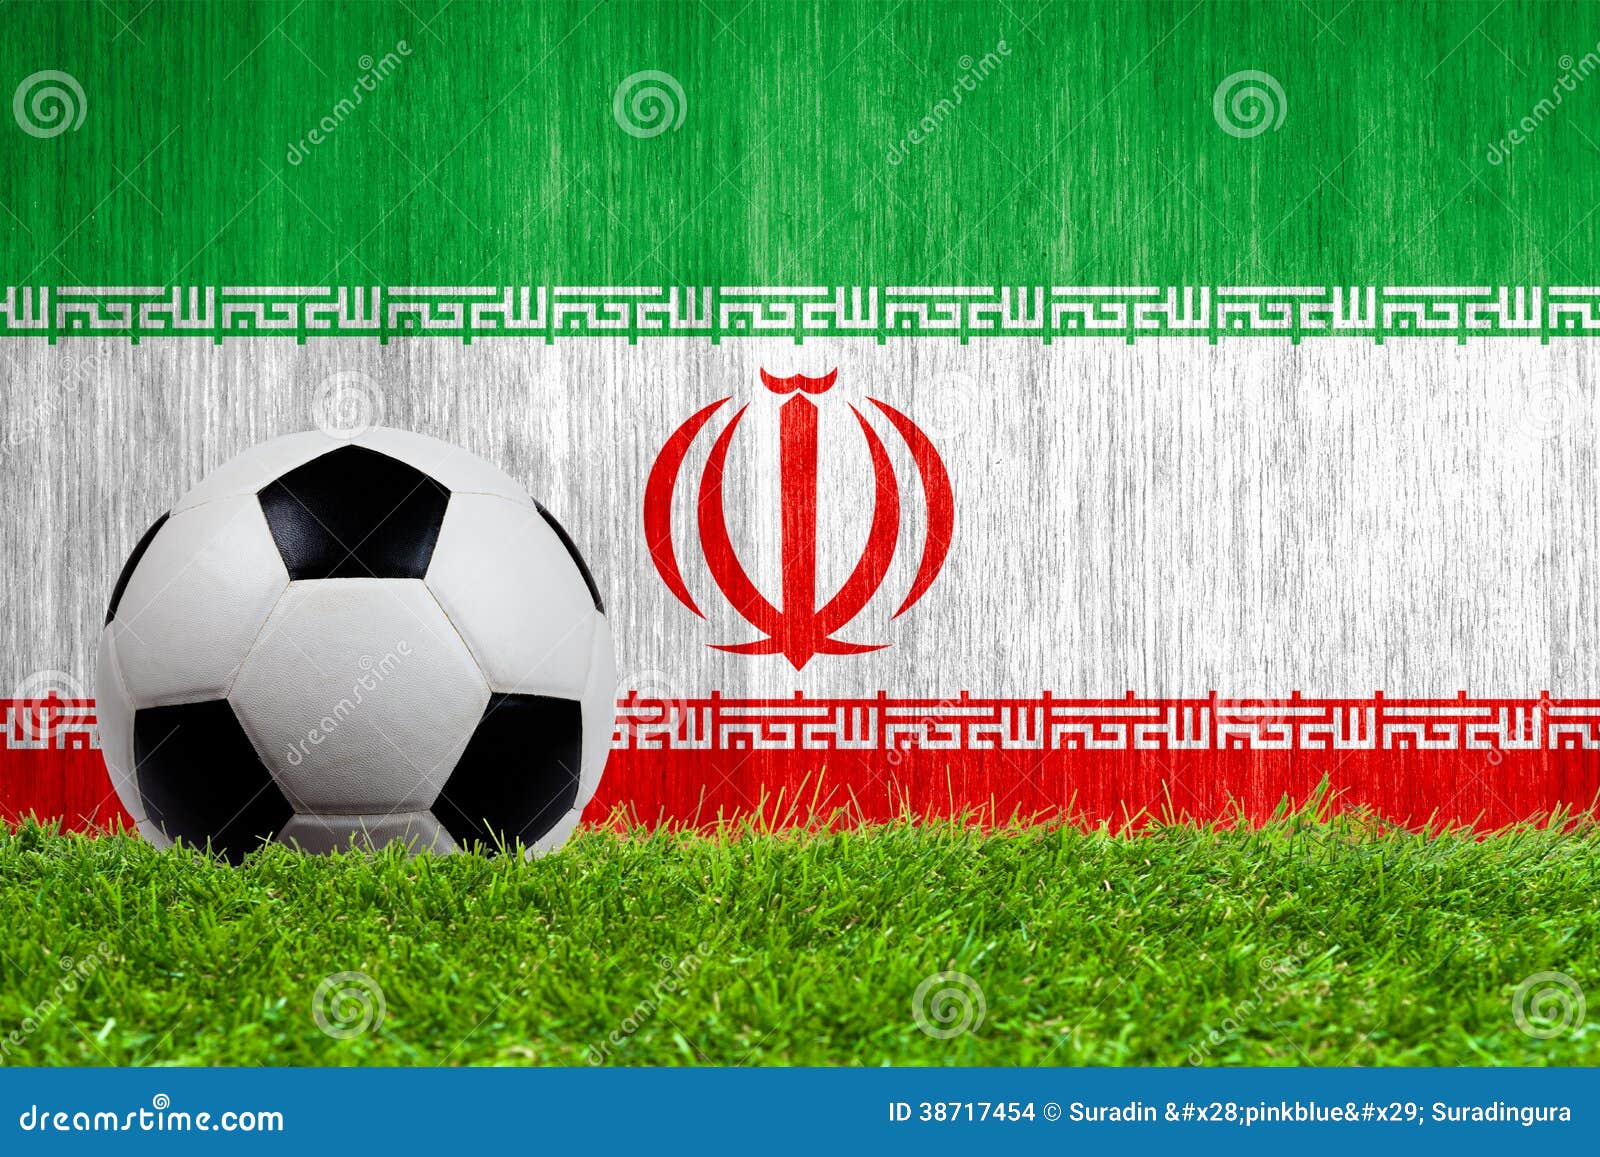 Soccer Ball on Grass with Iran Flag Background Stock Photo - Image of ...